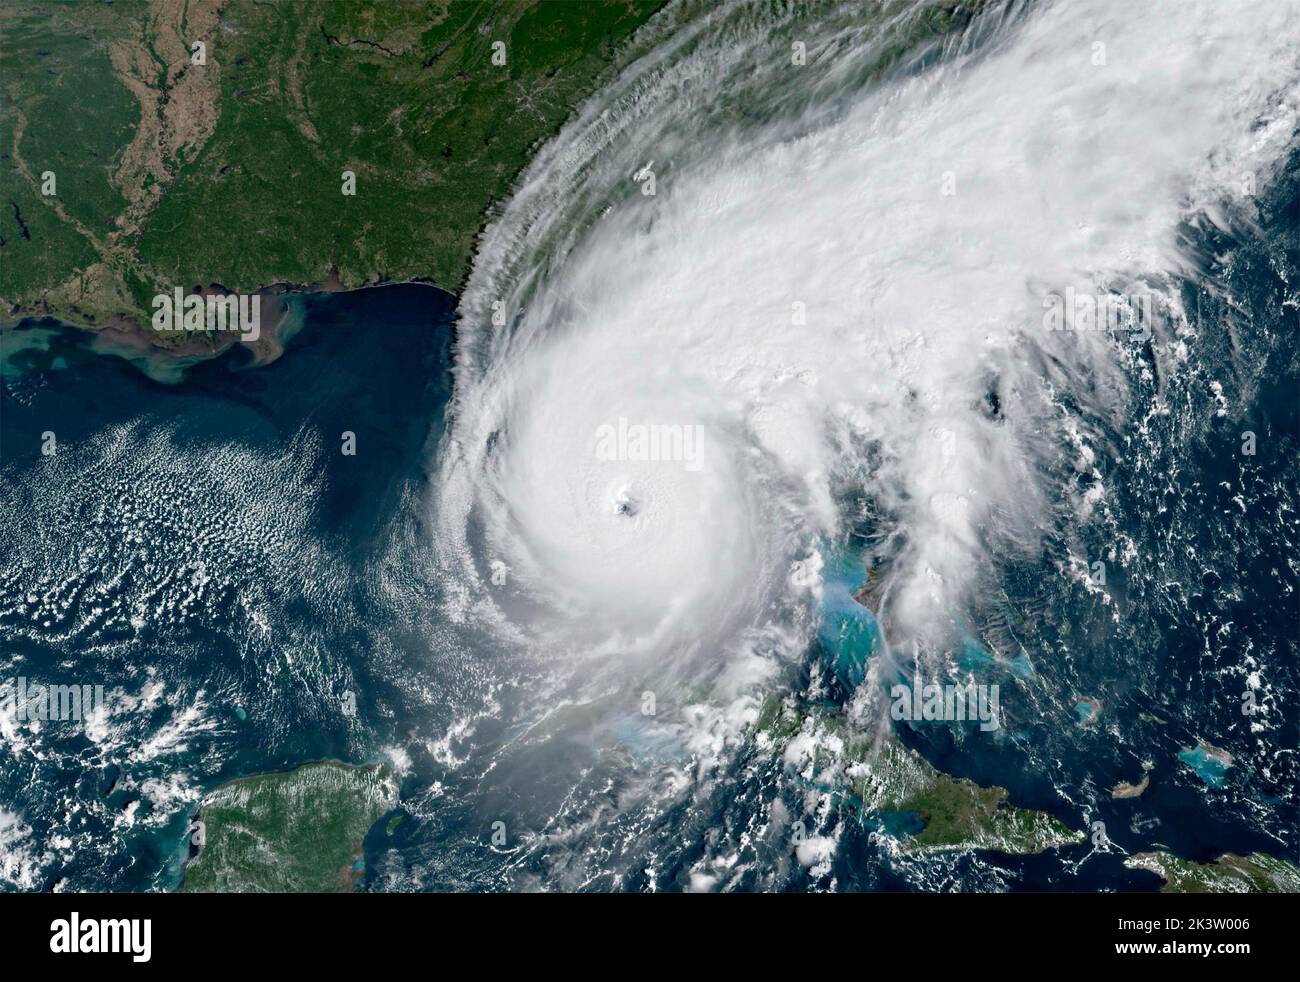 Nasa Eosdis, Earth Orbit. 28th Sep, 2022. NASA EOSDIS, EARTH ORBIT. 28 September, 2022. View of Hurricane Ian as the eye wall comes ashore at Fort Meyers Florida on the west coast of Florida as a Category 4 dangerous storm as seen from the NASA EOSDIS satellite, September 28, 2022 in Earth Orbit. Credit: EOSDIS/NASA/Alamy Live News Stock Photo